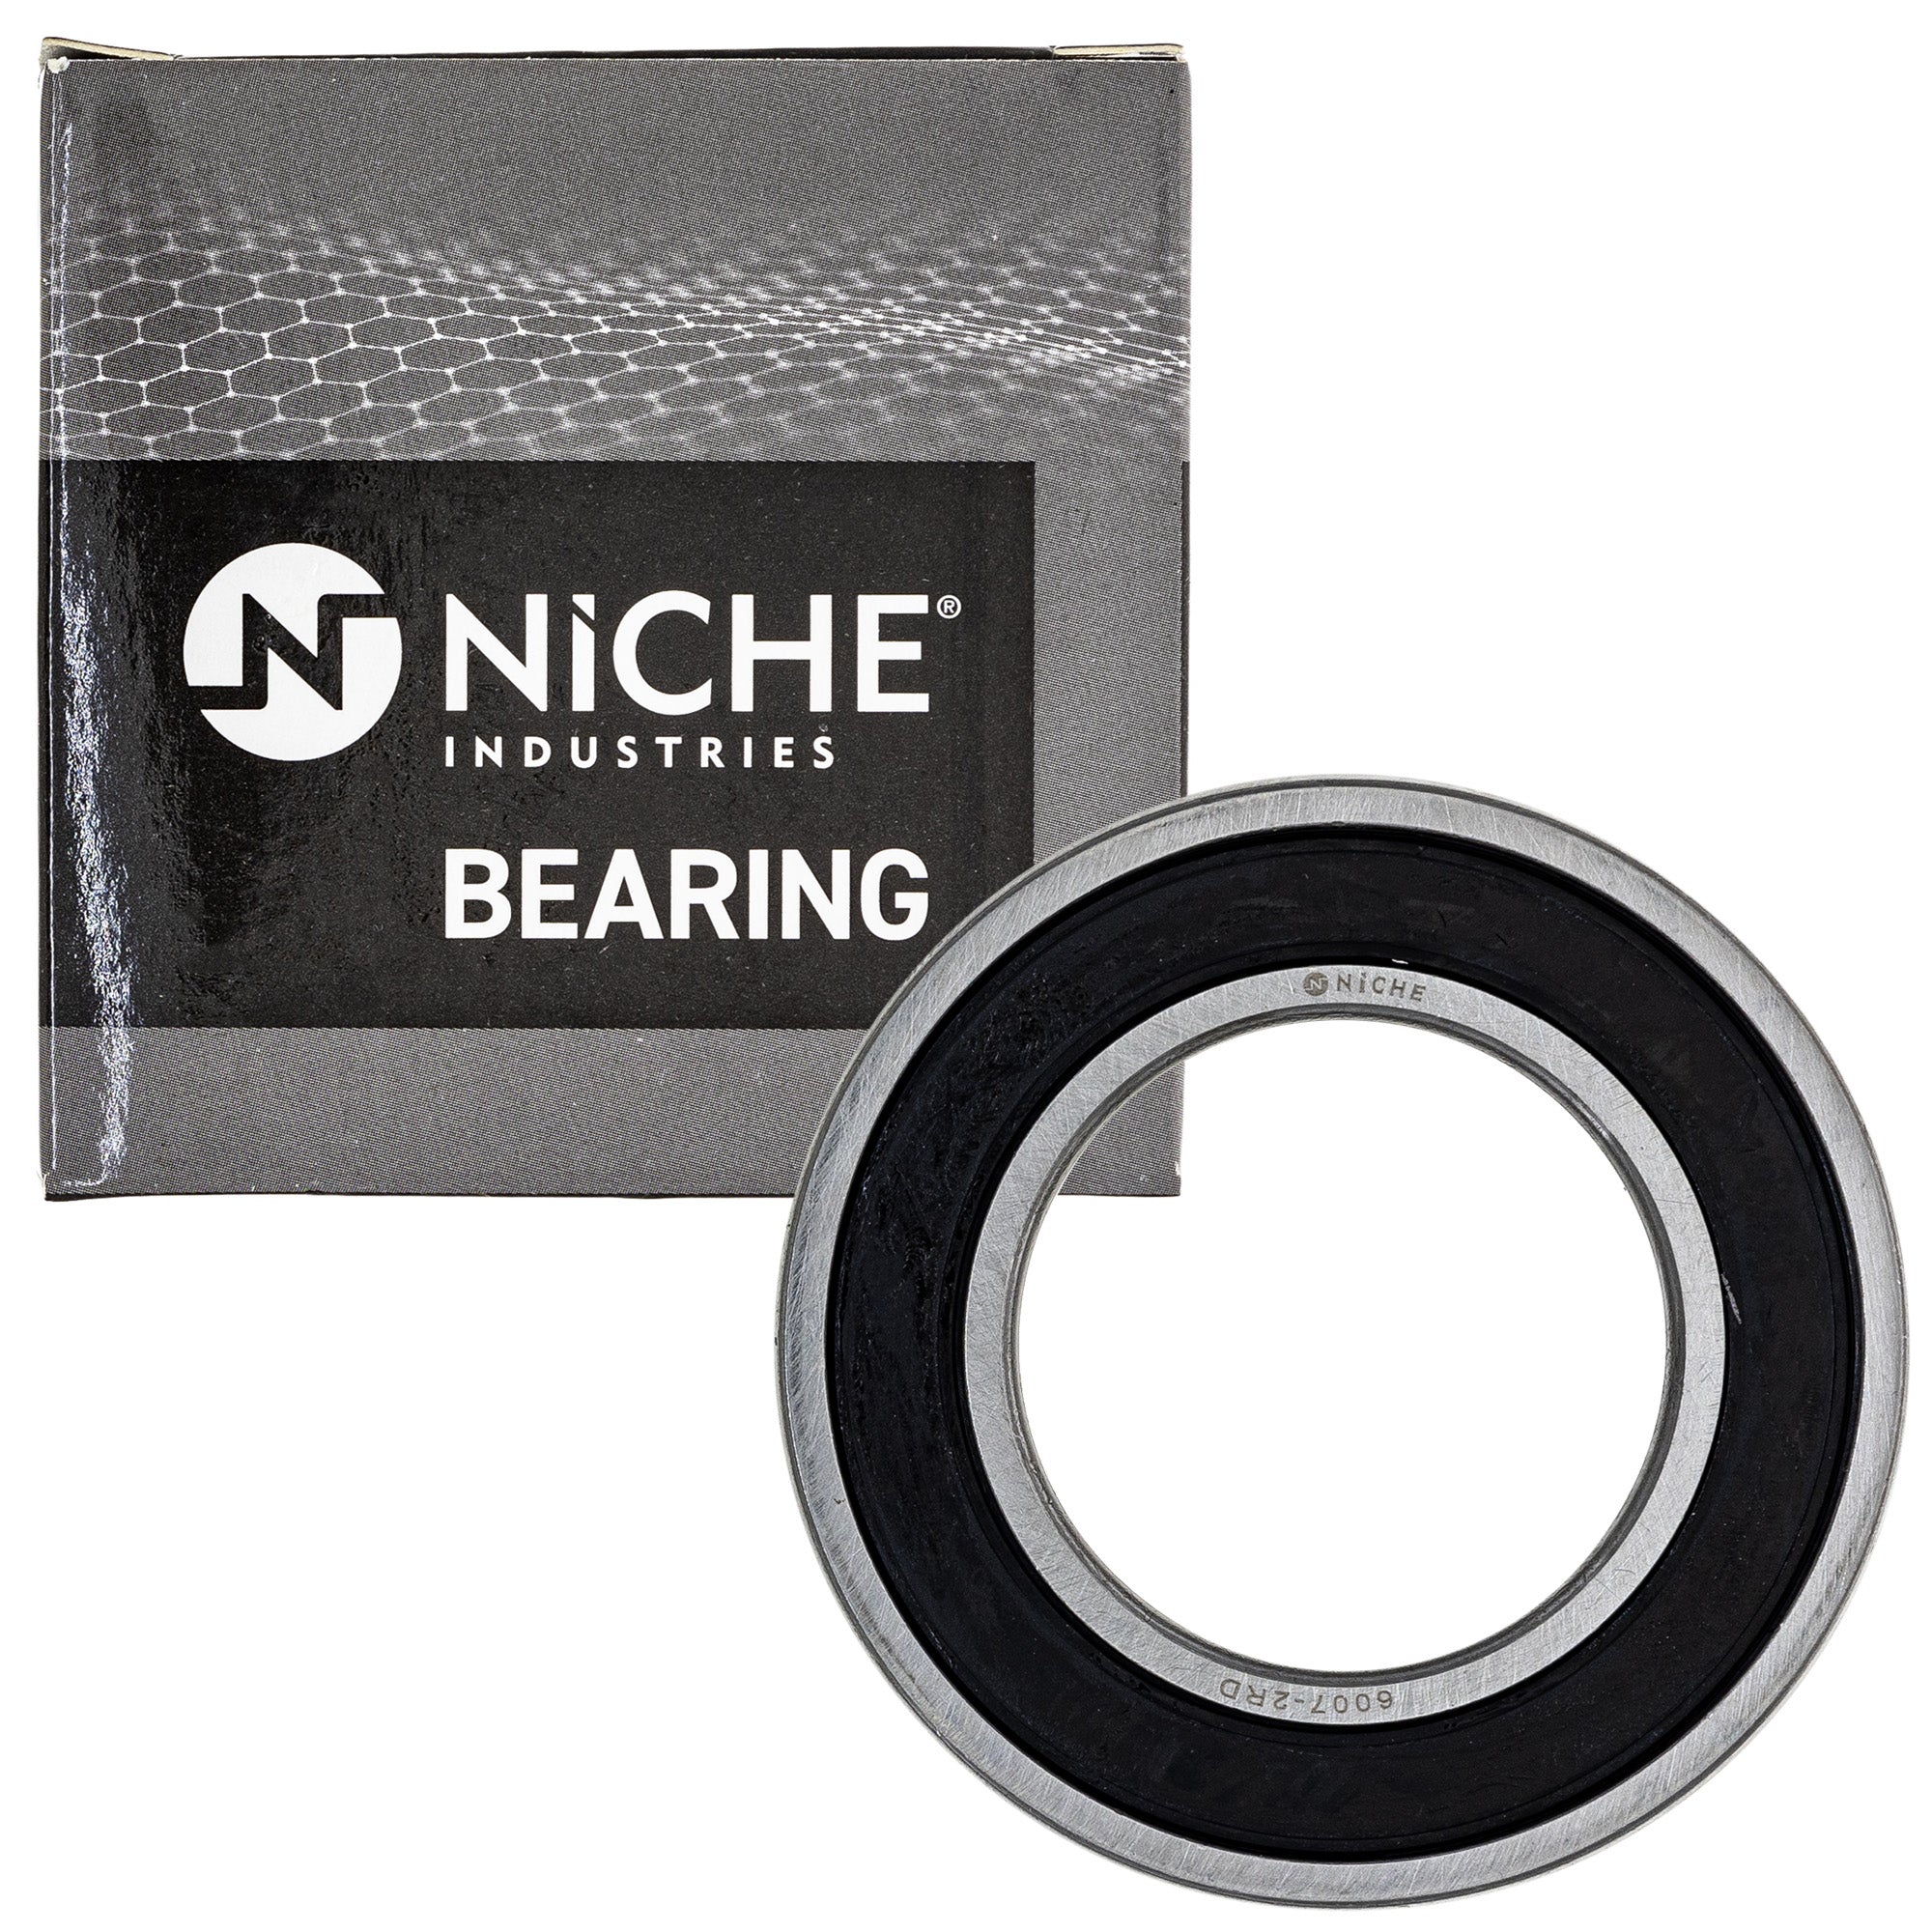 NICHE MK1009111 Wheel Bearing Seal Kit for zOTHER Grizzly FourTrax